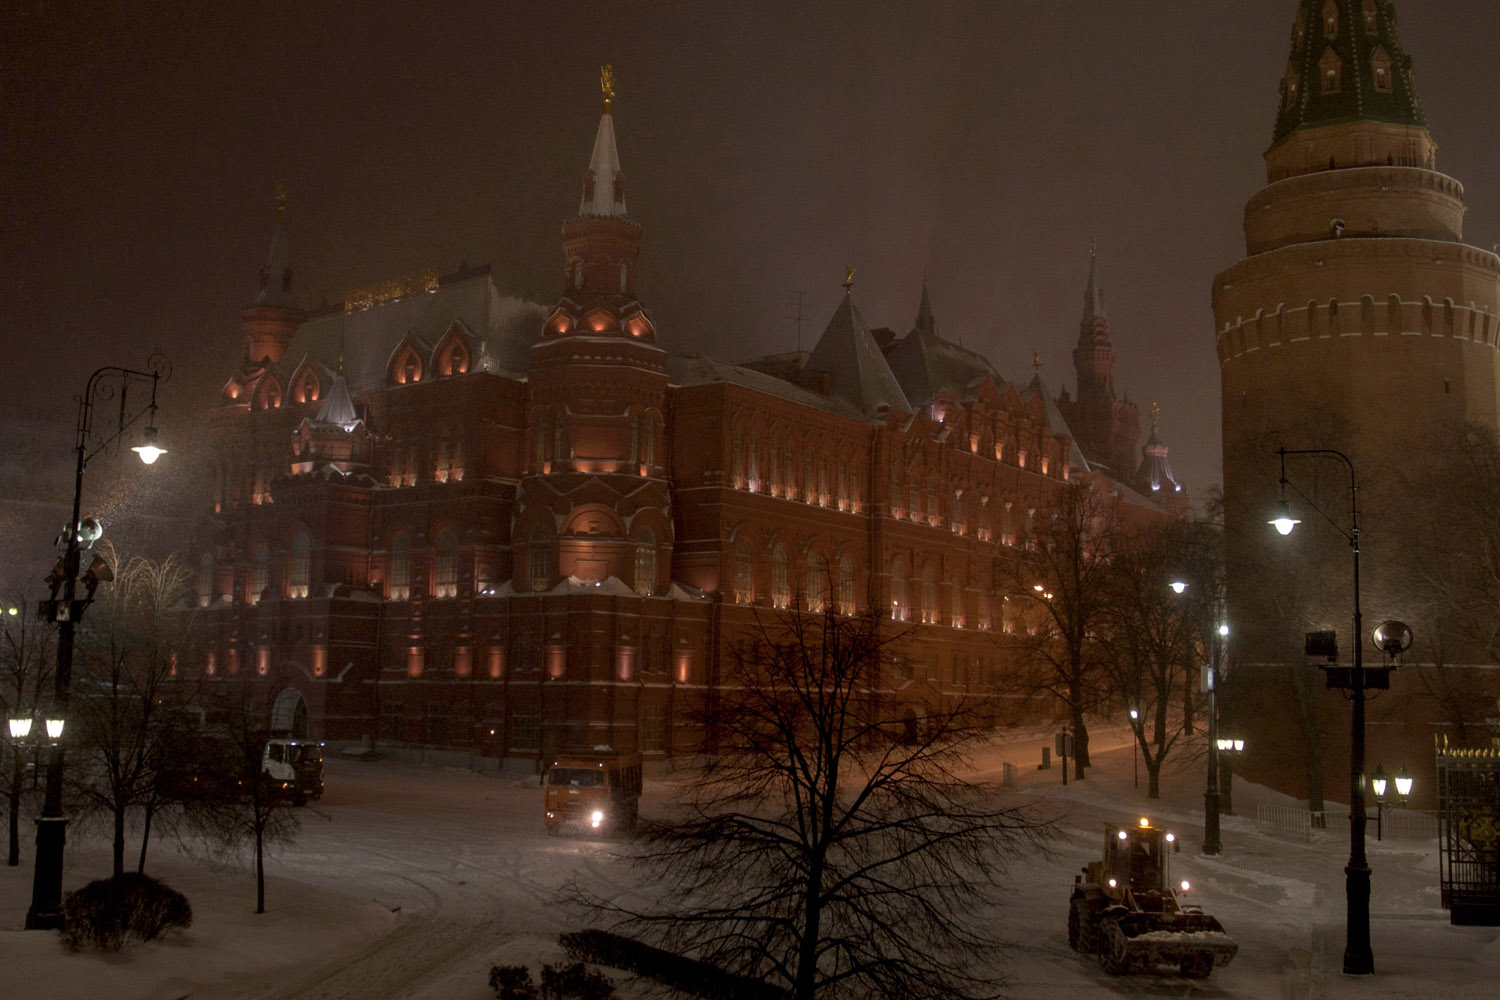 March 24, 2013. A snow plow clears the Manezhnaya Square just outside the Kremlin in Moscow.